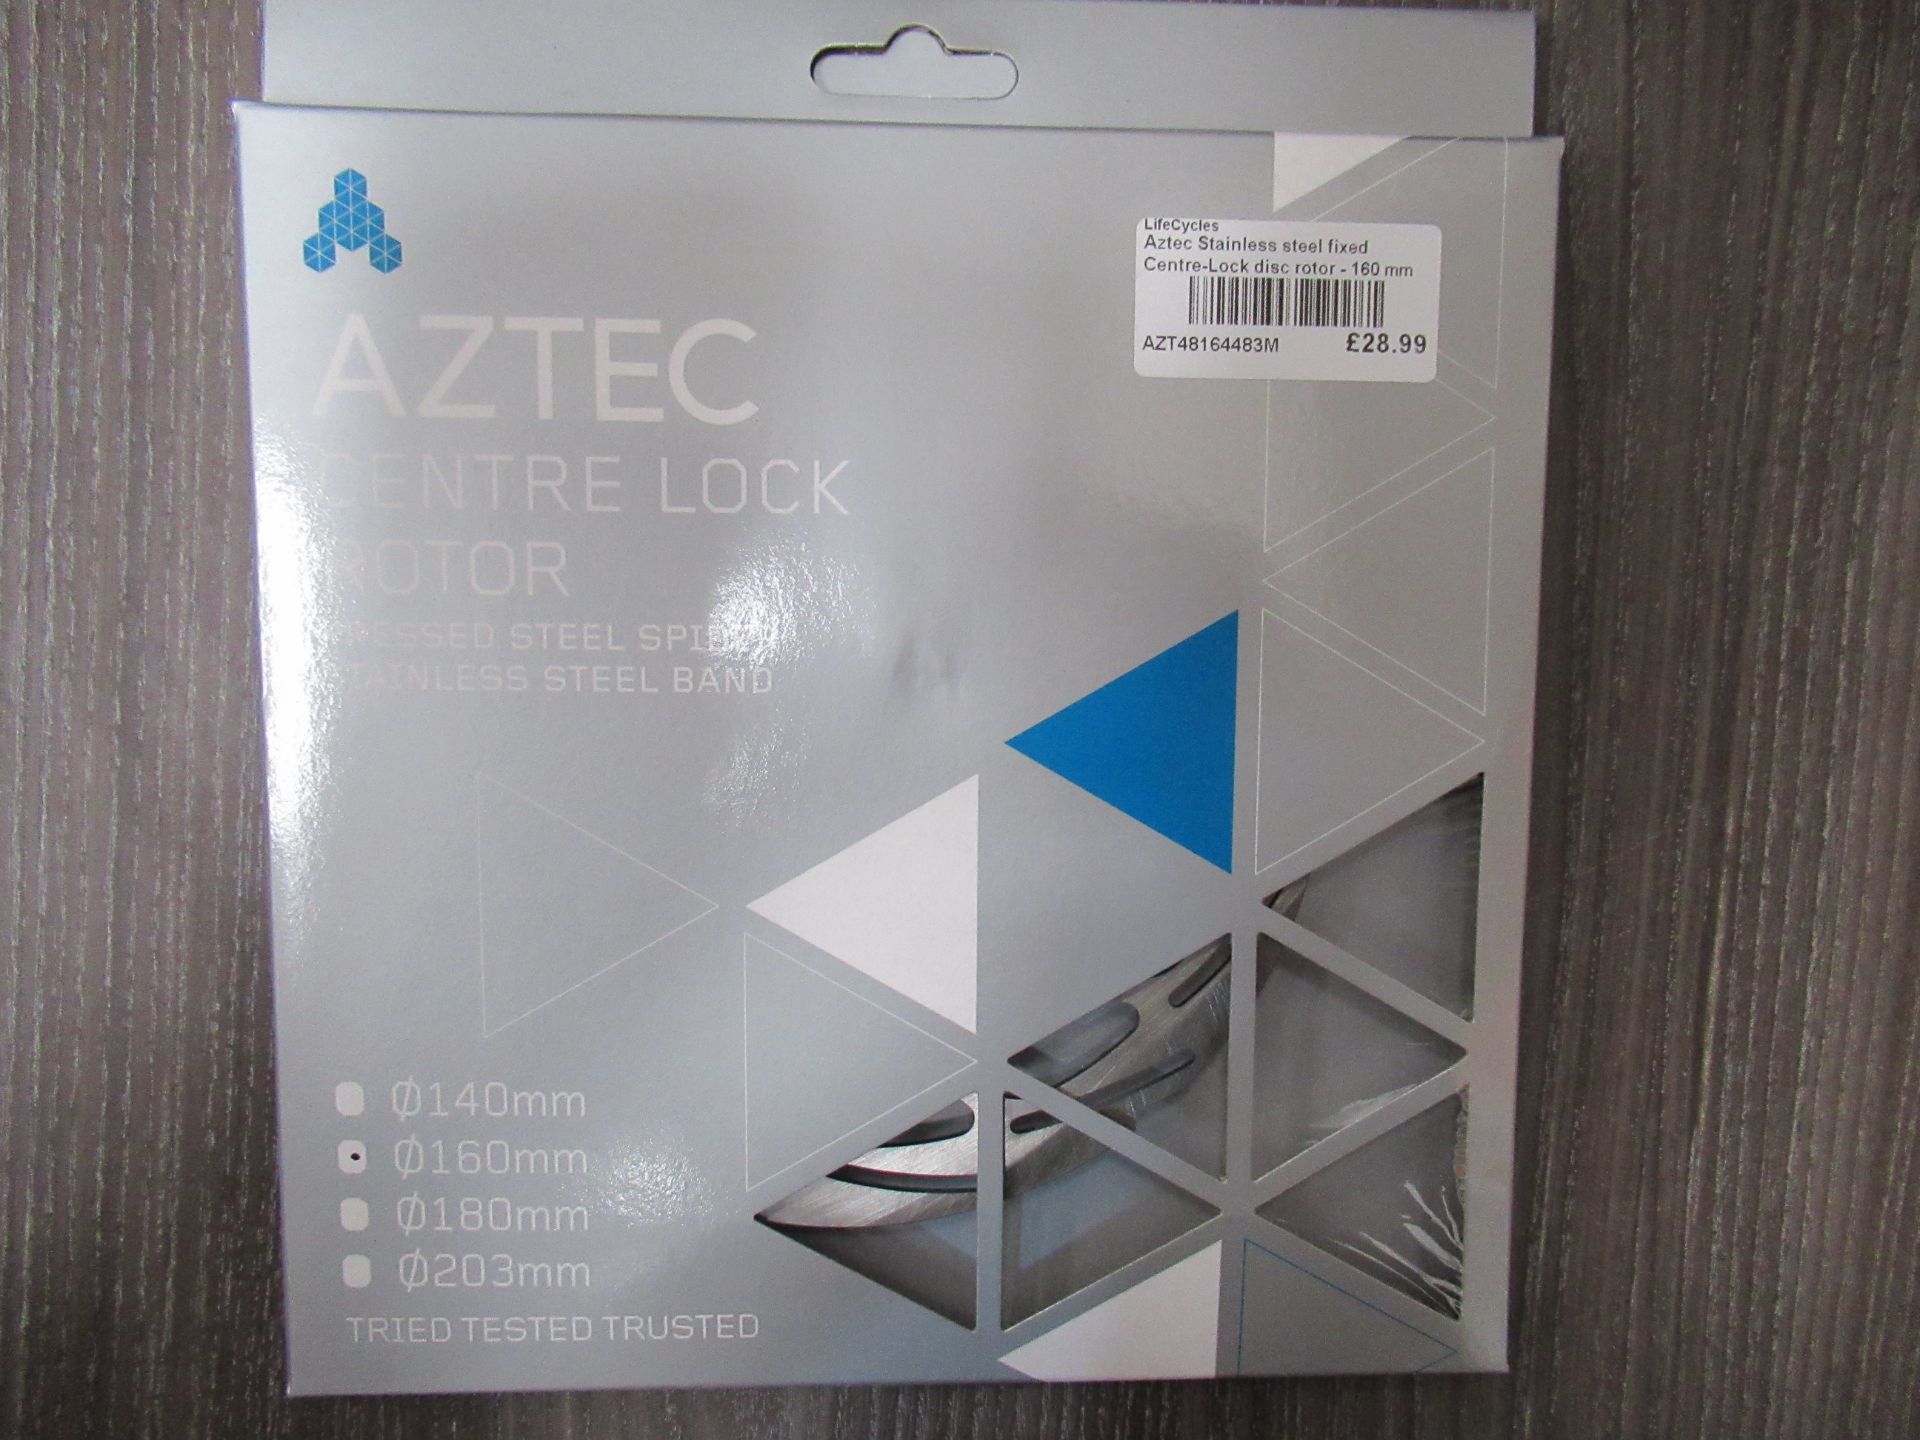 6 x Aztec Centre Lock Rotor's: 2 x 160mm (RRP£28.99 each); 3 x 180mm (RRP£32.99) and 1 x 203mm (RRP£ - Image 2 of 13